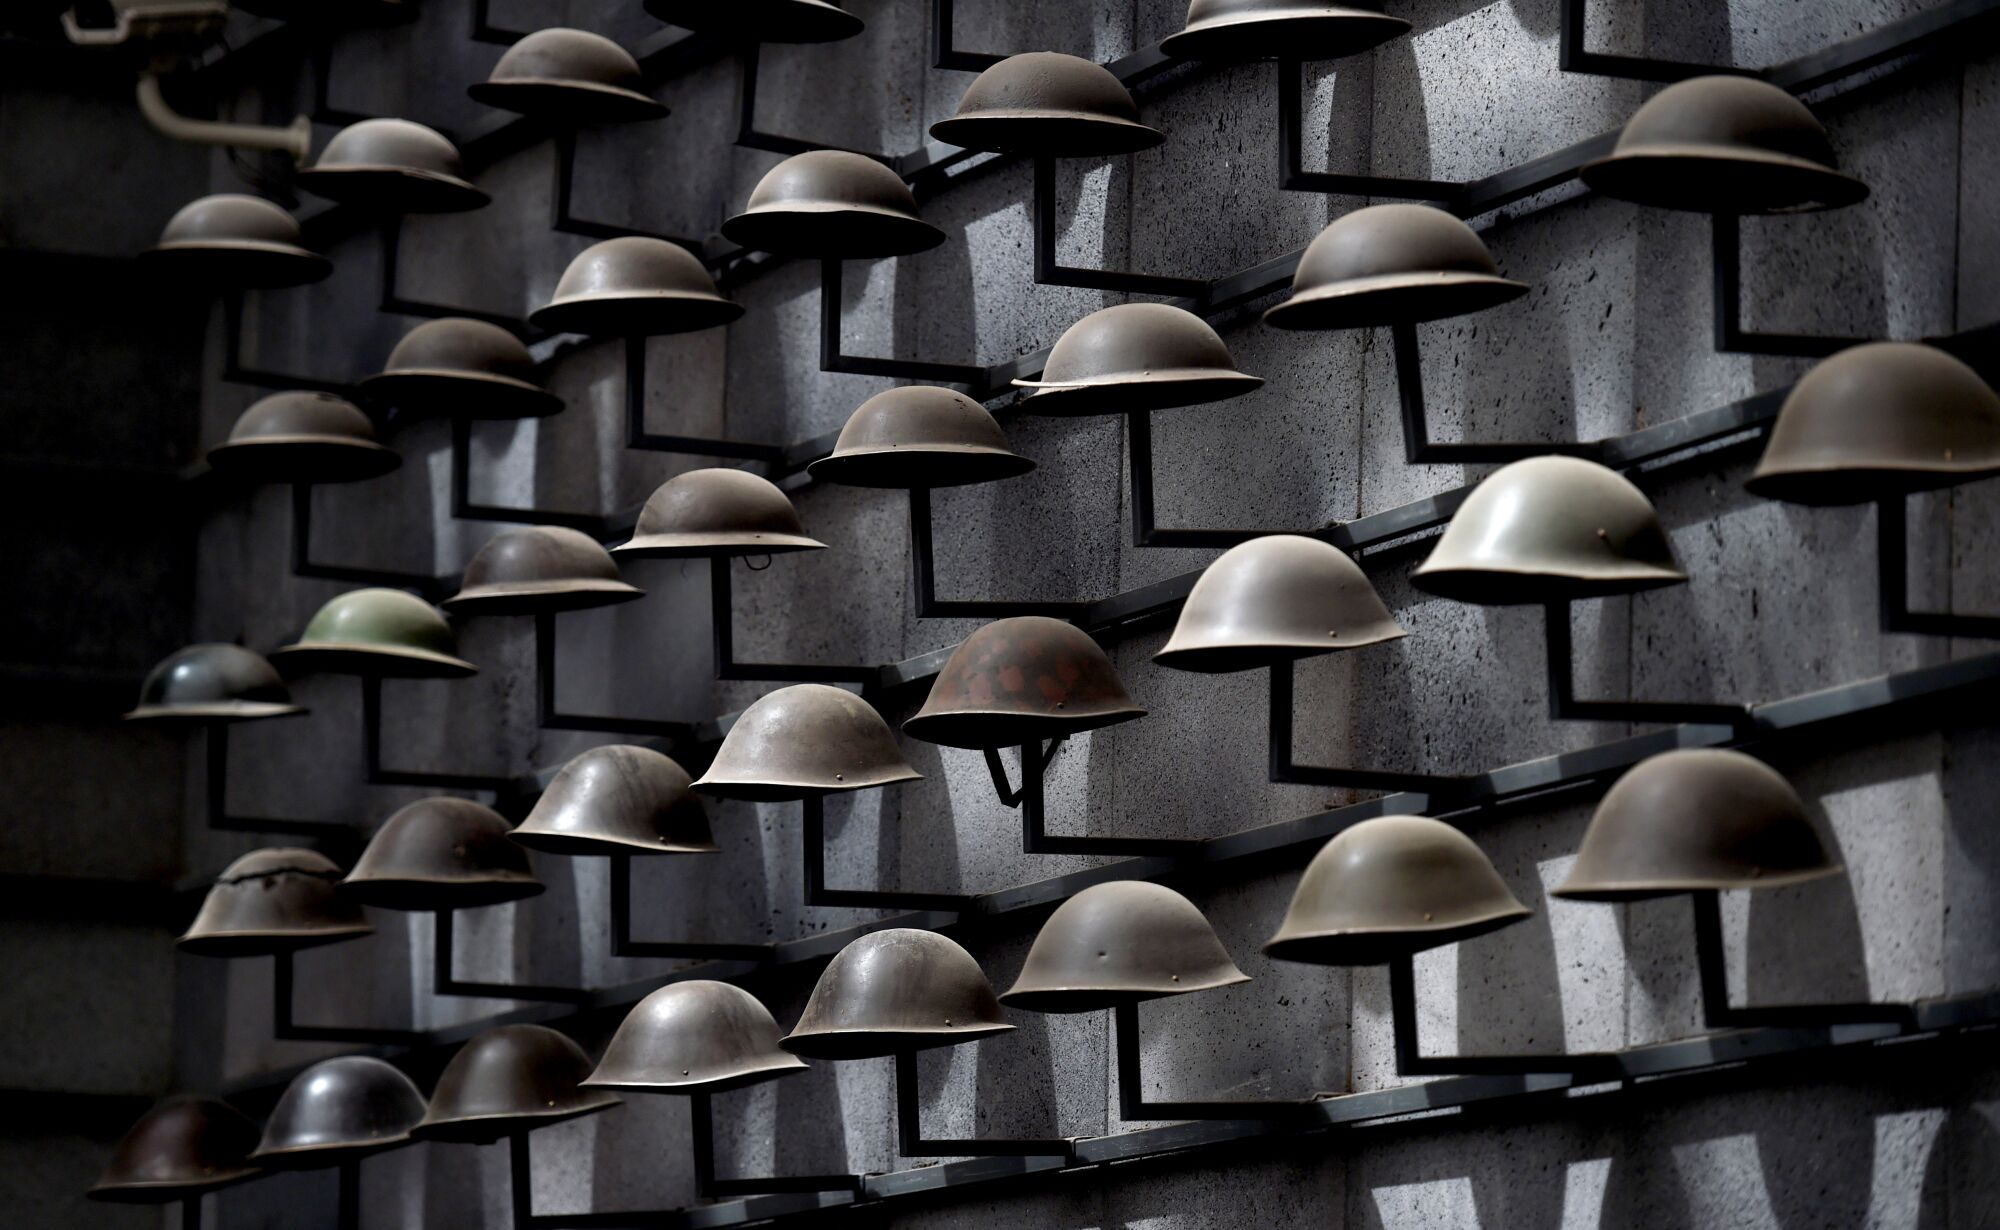 Military helmets on display at the martyrs cemetery museum in Tengchong, China.